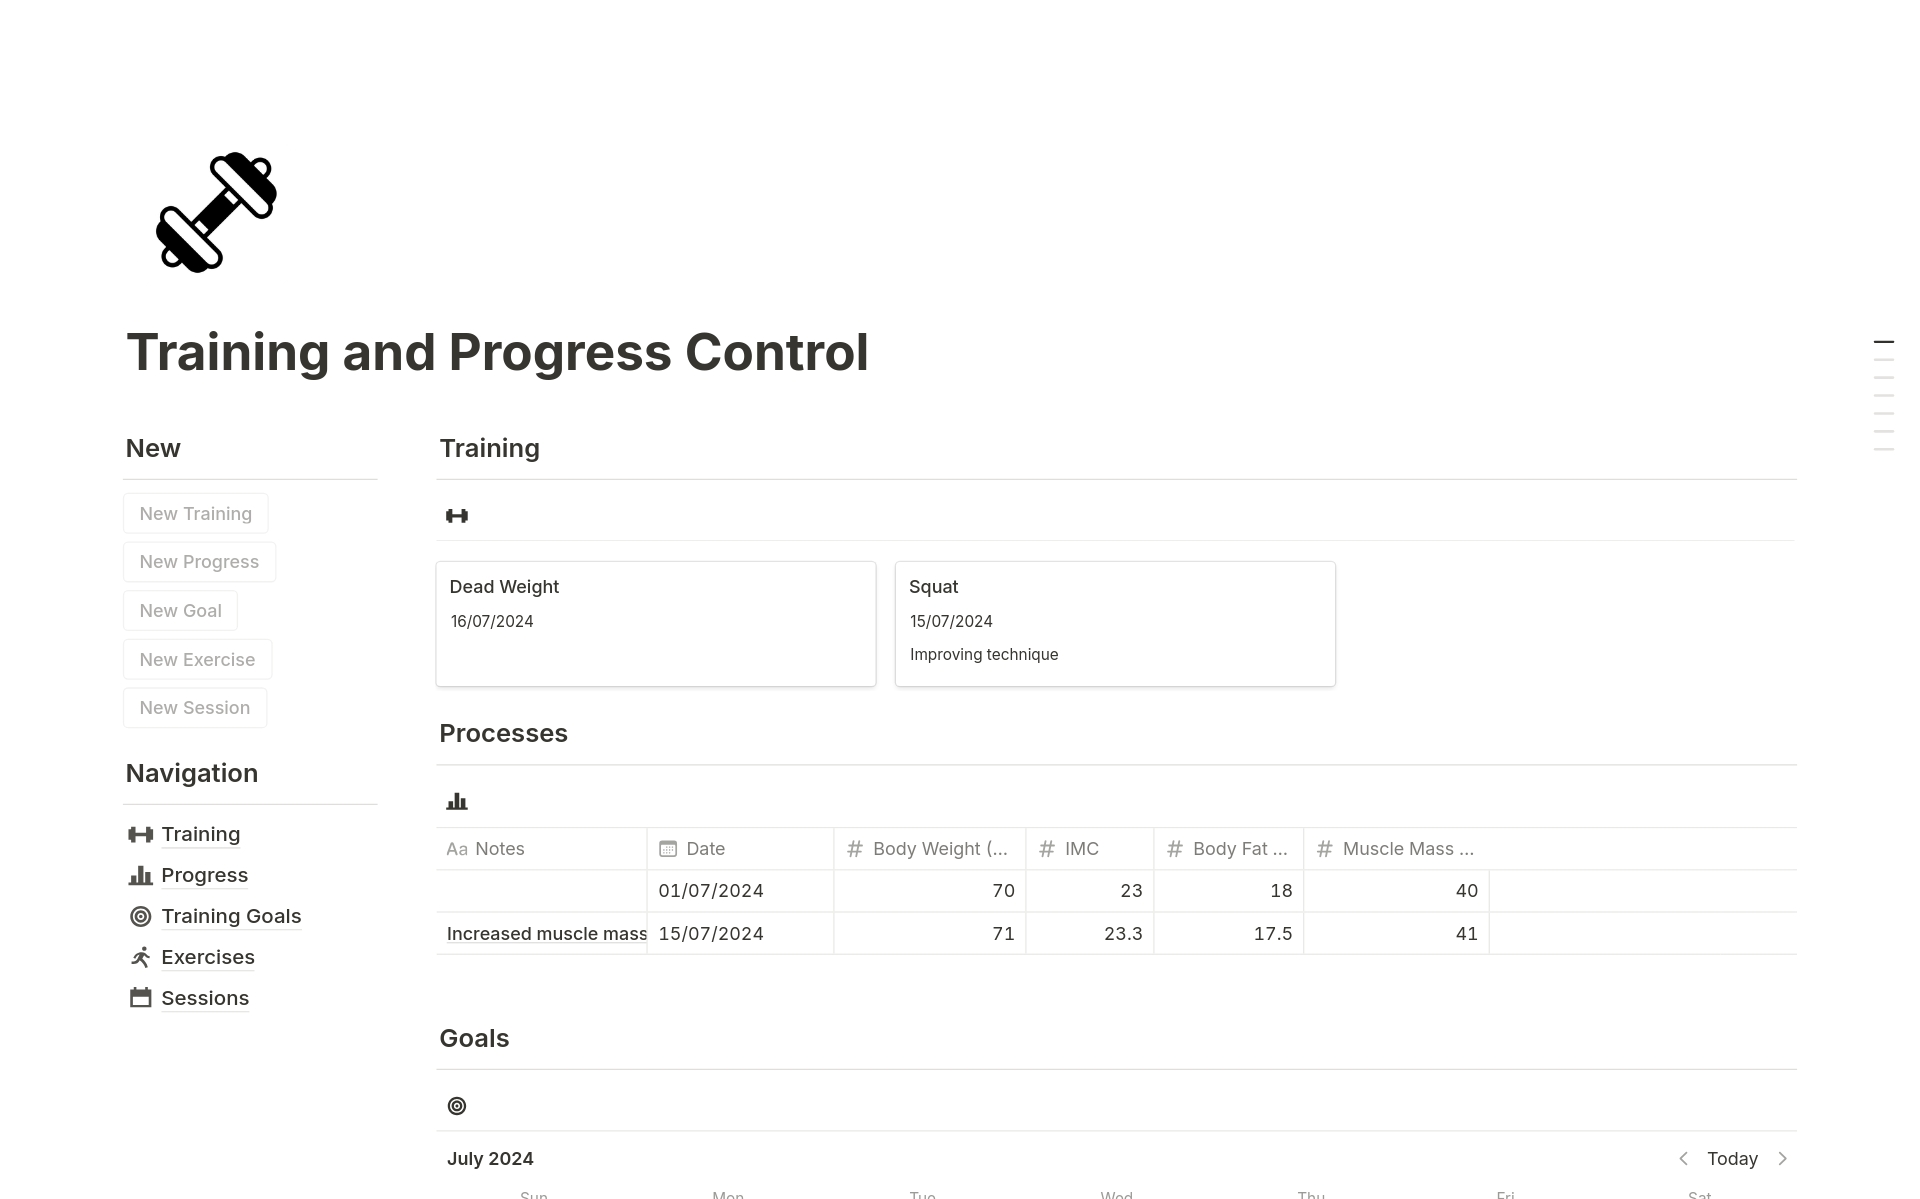 Optimize your workouts with our Workout and Progress Tracking template. Log sessions, monitor progress and reach your fitness goals with ease.